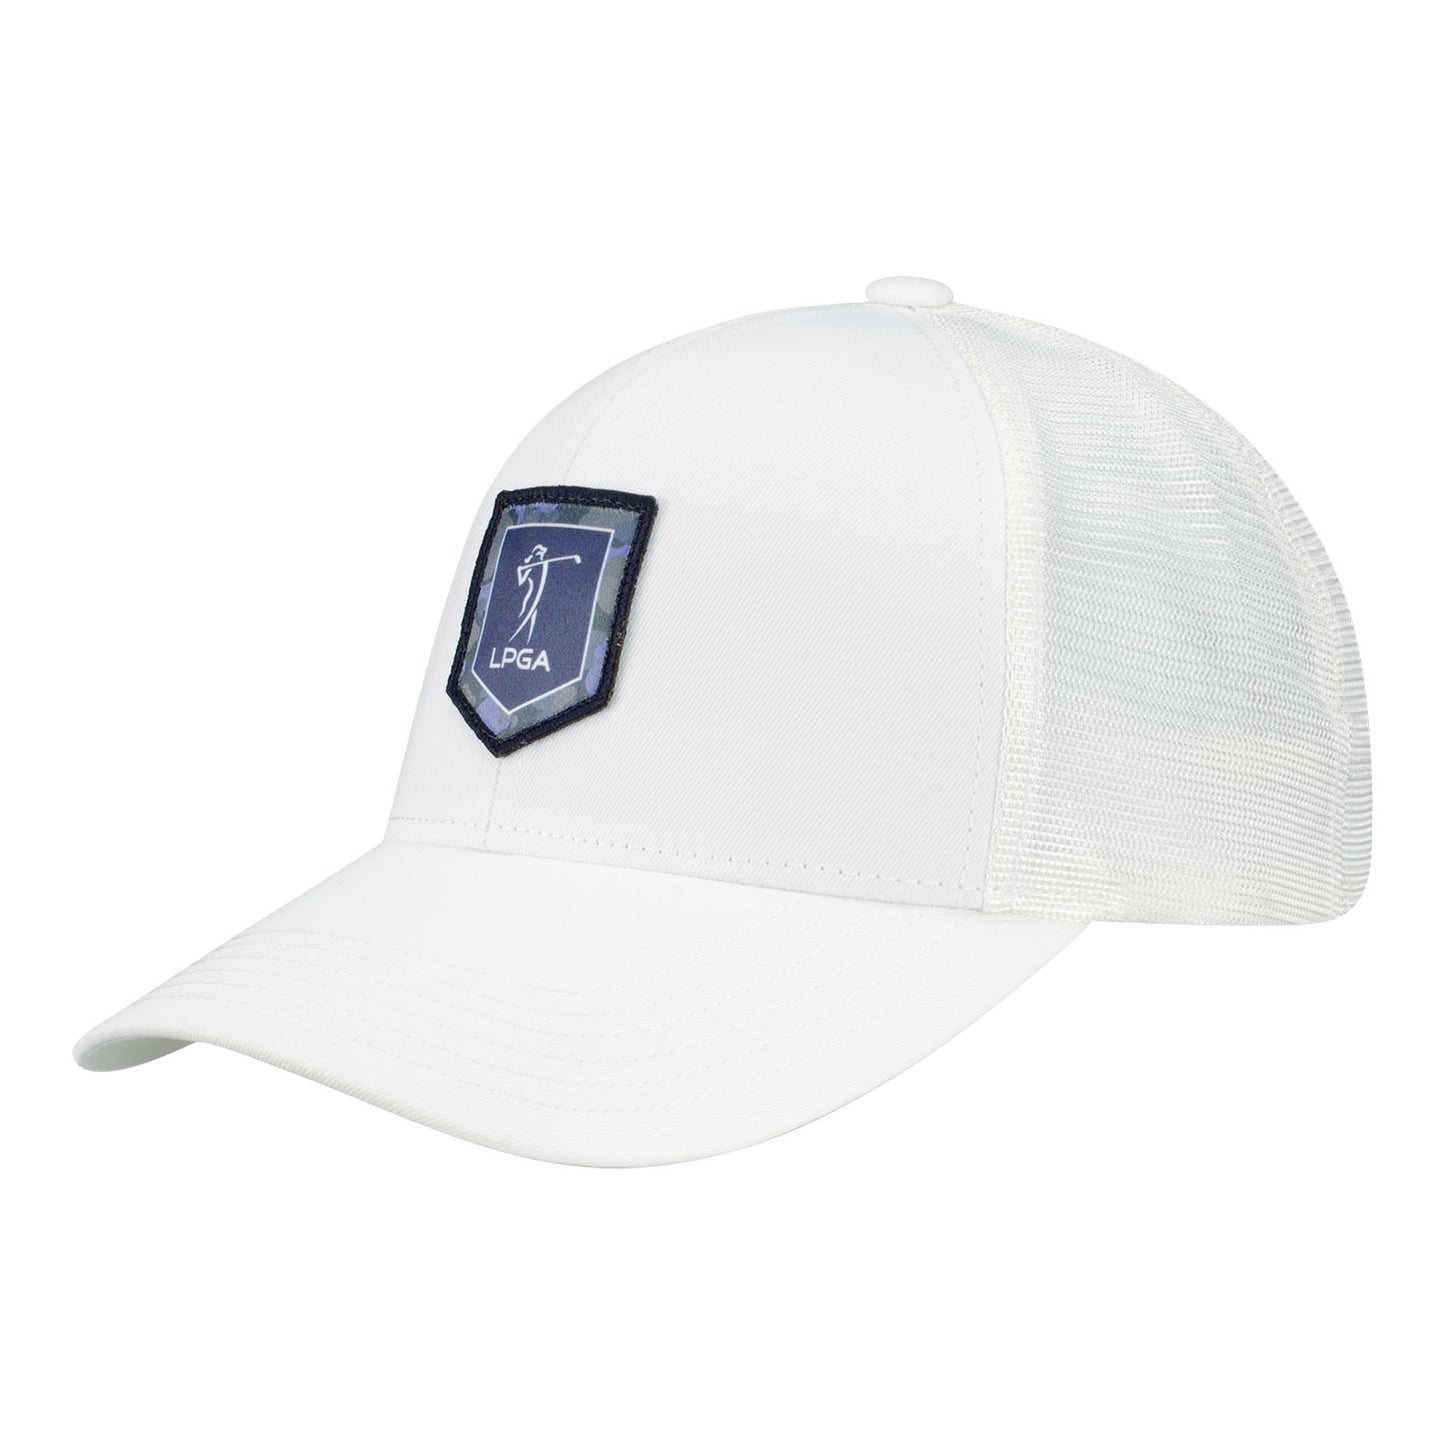 Imperial LPGA Men's Mesh Back Hat with Satin Edged Patch in White - Angled Left Side View